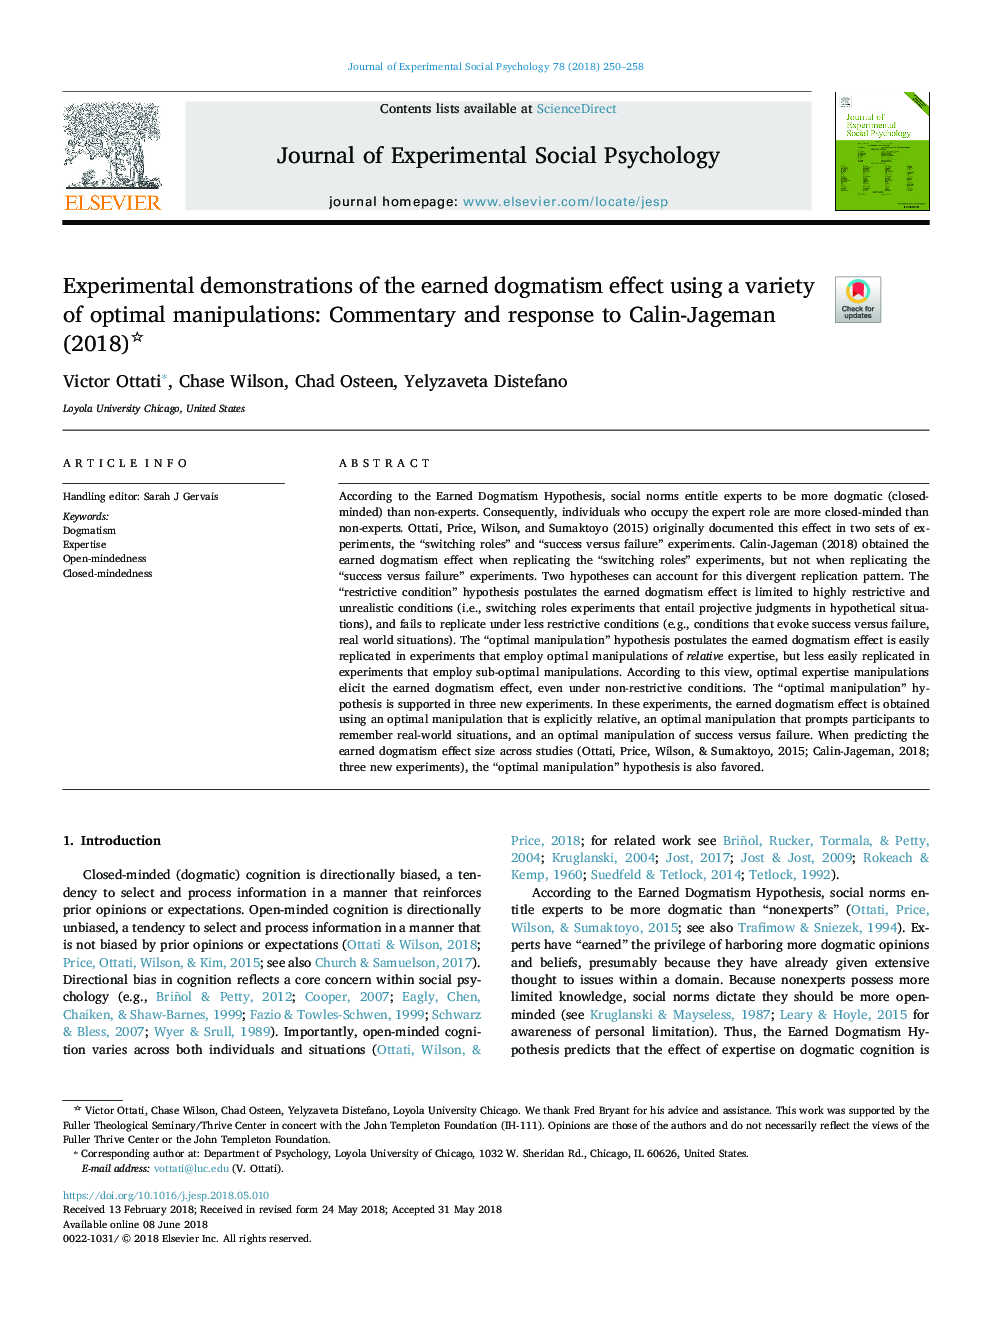 Experimental demonstrations of the earned dogmatism effect using a variety of optimal manipulations: Commentary and response to Calin-Jageman (2018)